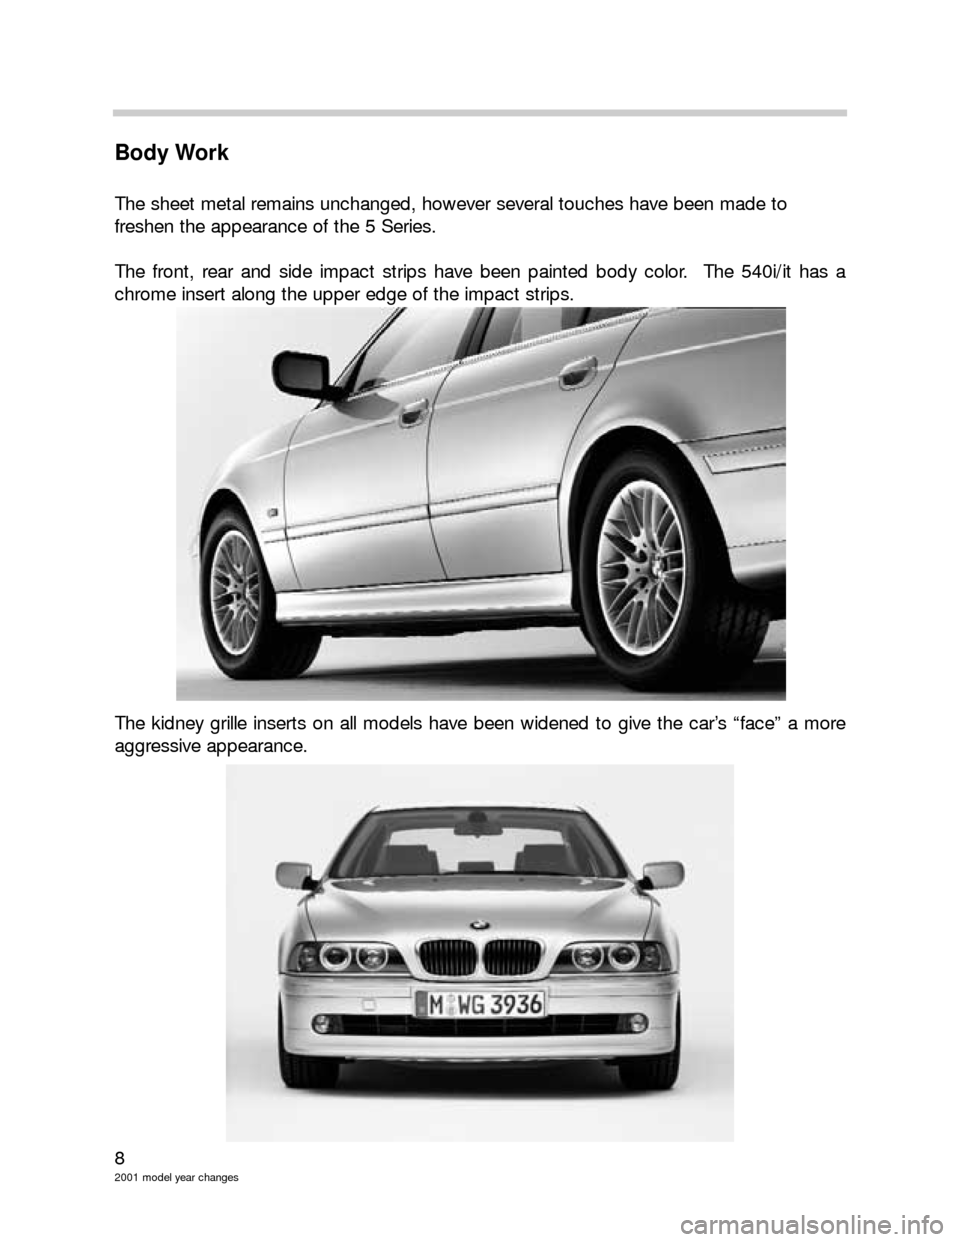 BMW 3 SERIES 2005 E46 Model Yar Changes 8
2001 model year changes
Body Work
The sheet metal remains unchanged, however several touches have been made to 
freshen the appearance of the 5 Series.
The front, rear and side impact strips have be